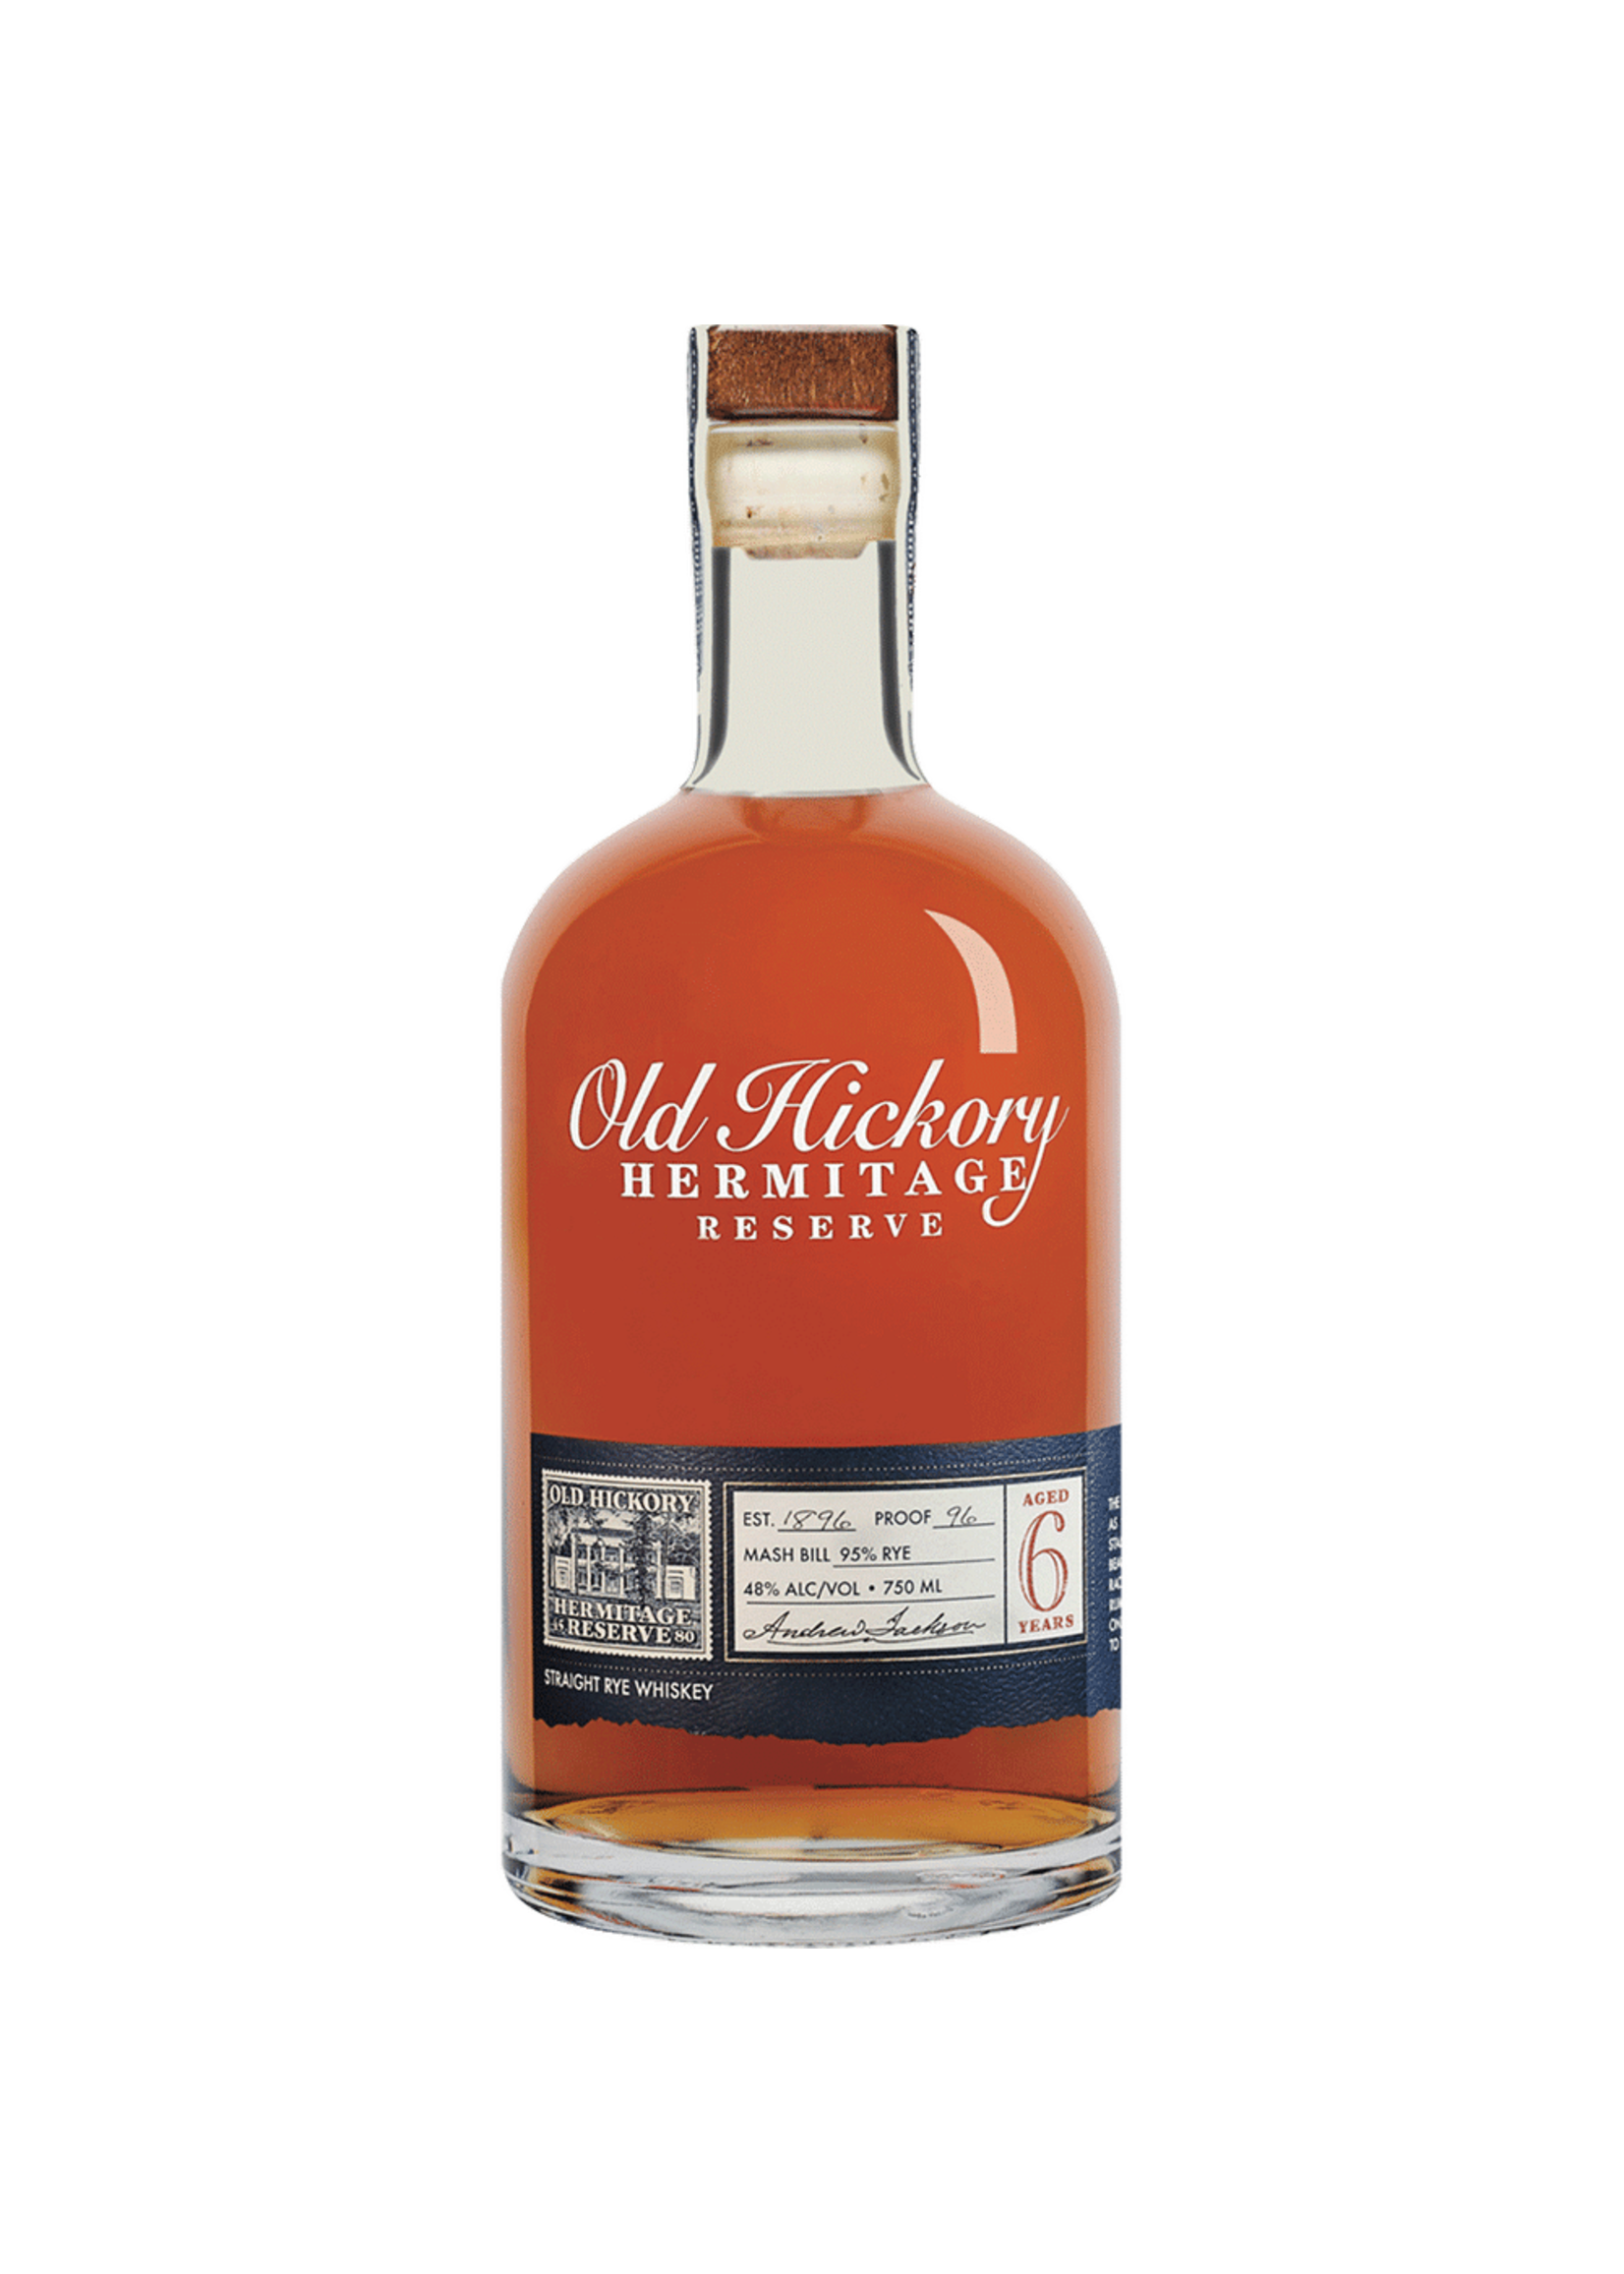 Old Hickory Hermitage Reserve Rye Whiskey 96Proof 750ml